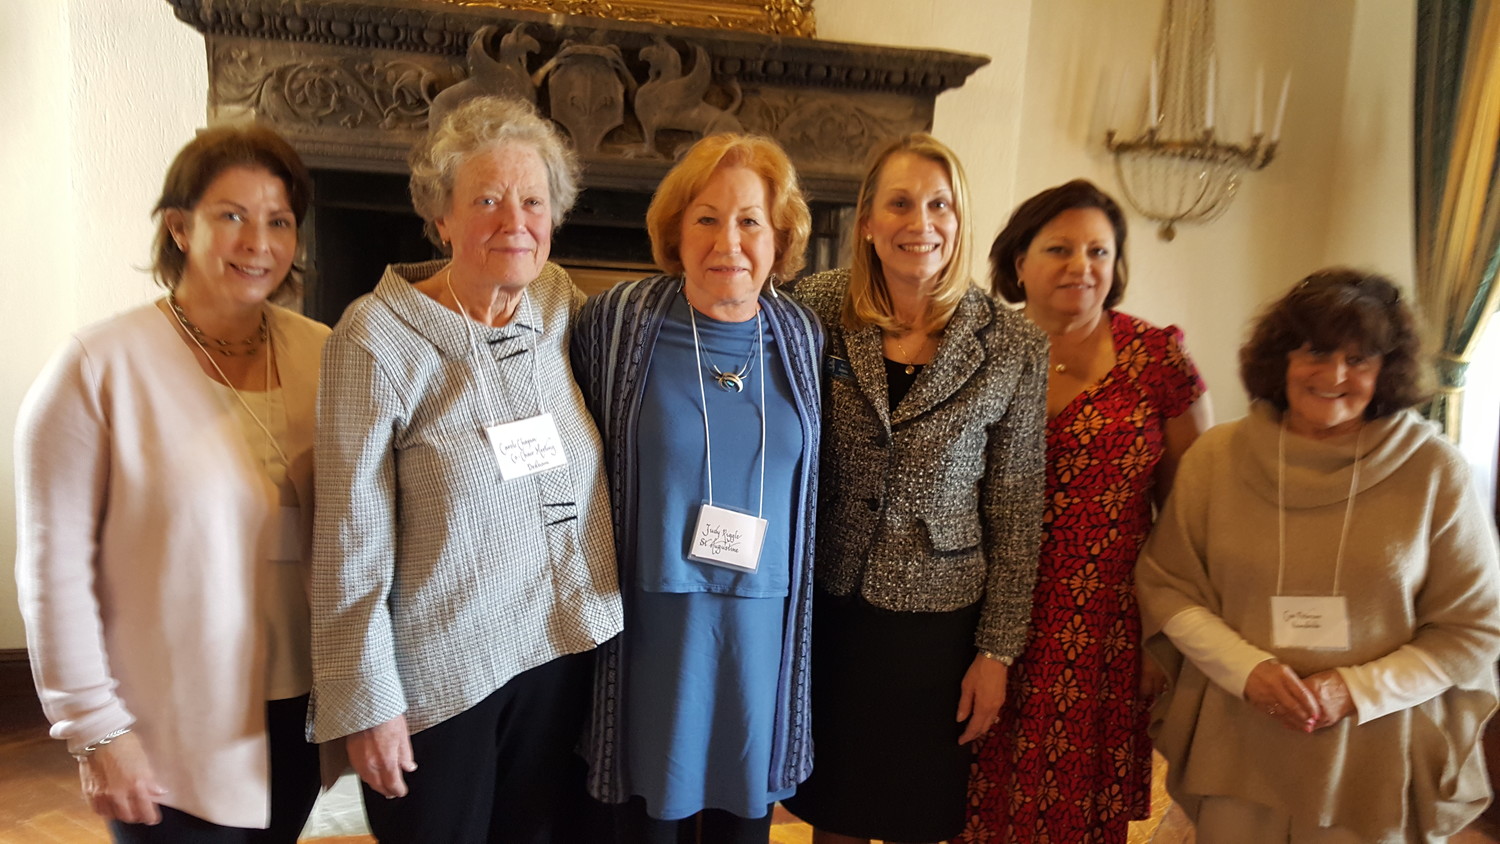 New Federation of Woman’s Exchanges President and Woman’s Exchange of St. Augustine Past President Judy Riggle (center) gathers with representatives from other Woman’s Exchange organizations from across the country.